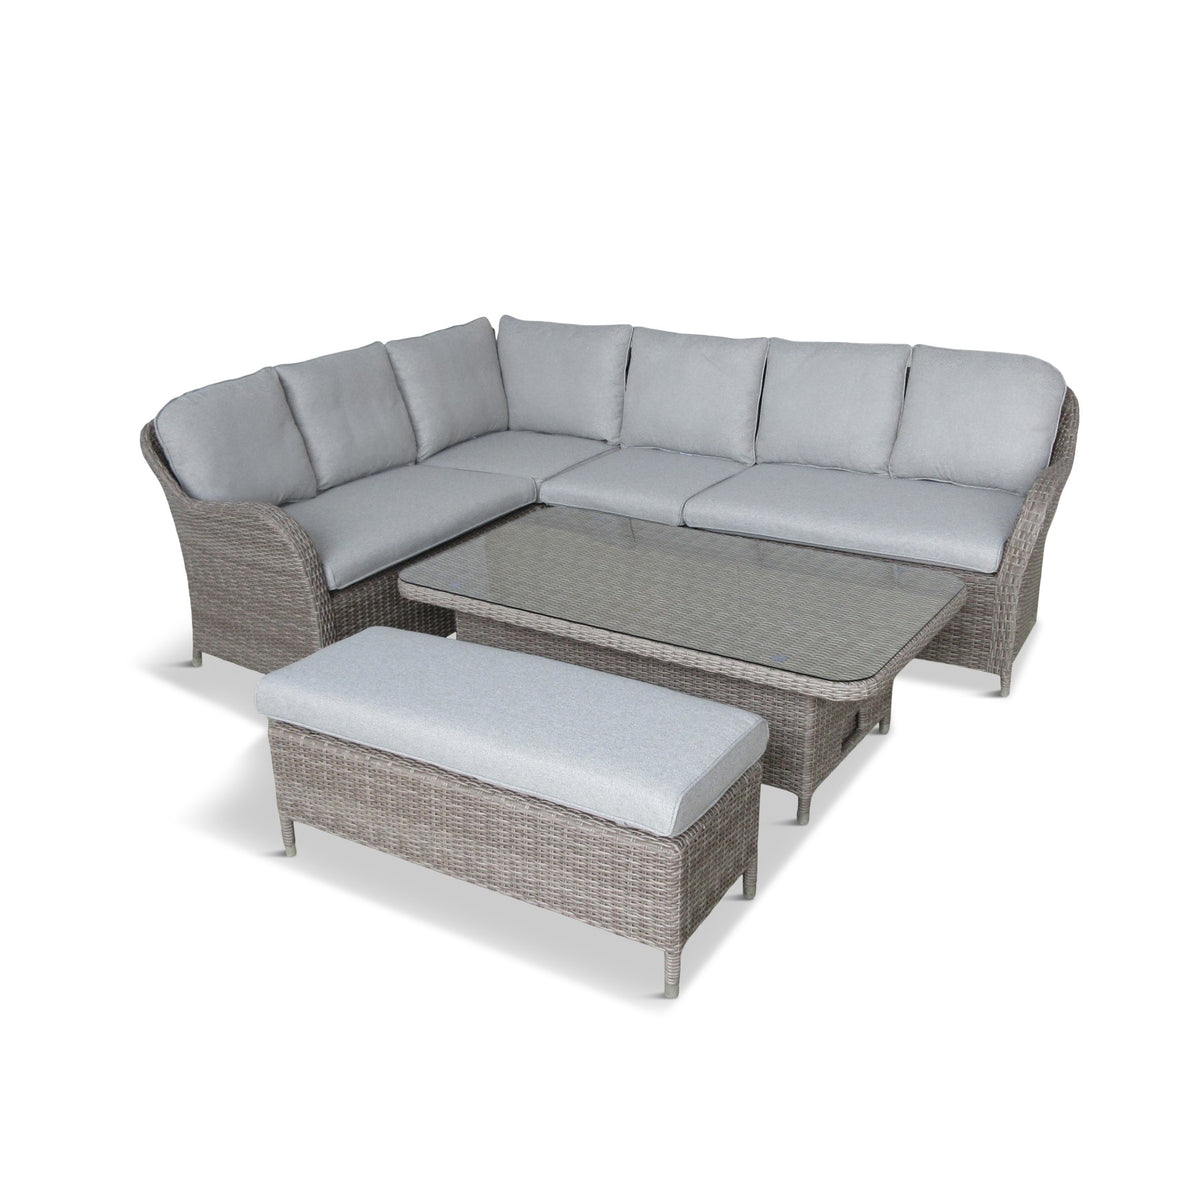 LG Monte Carlo Sand Modular Sofa Set With Height Adjustable Table and Reclining Corner